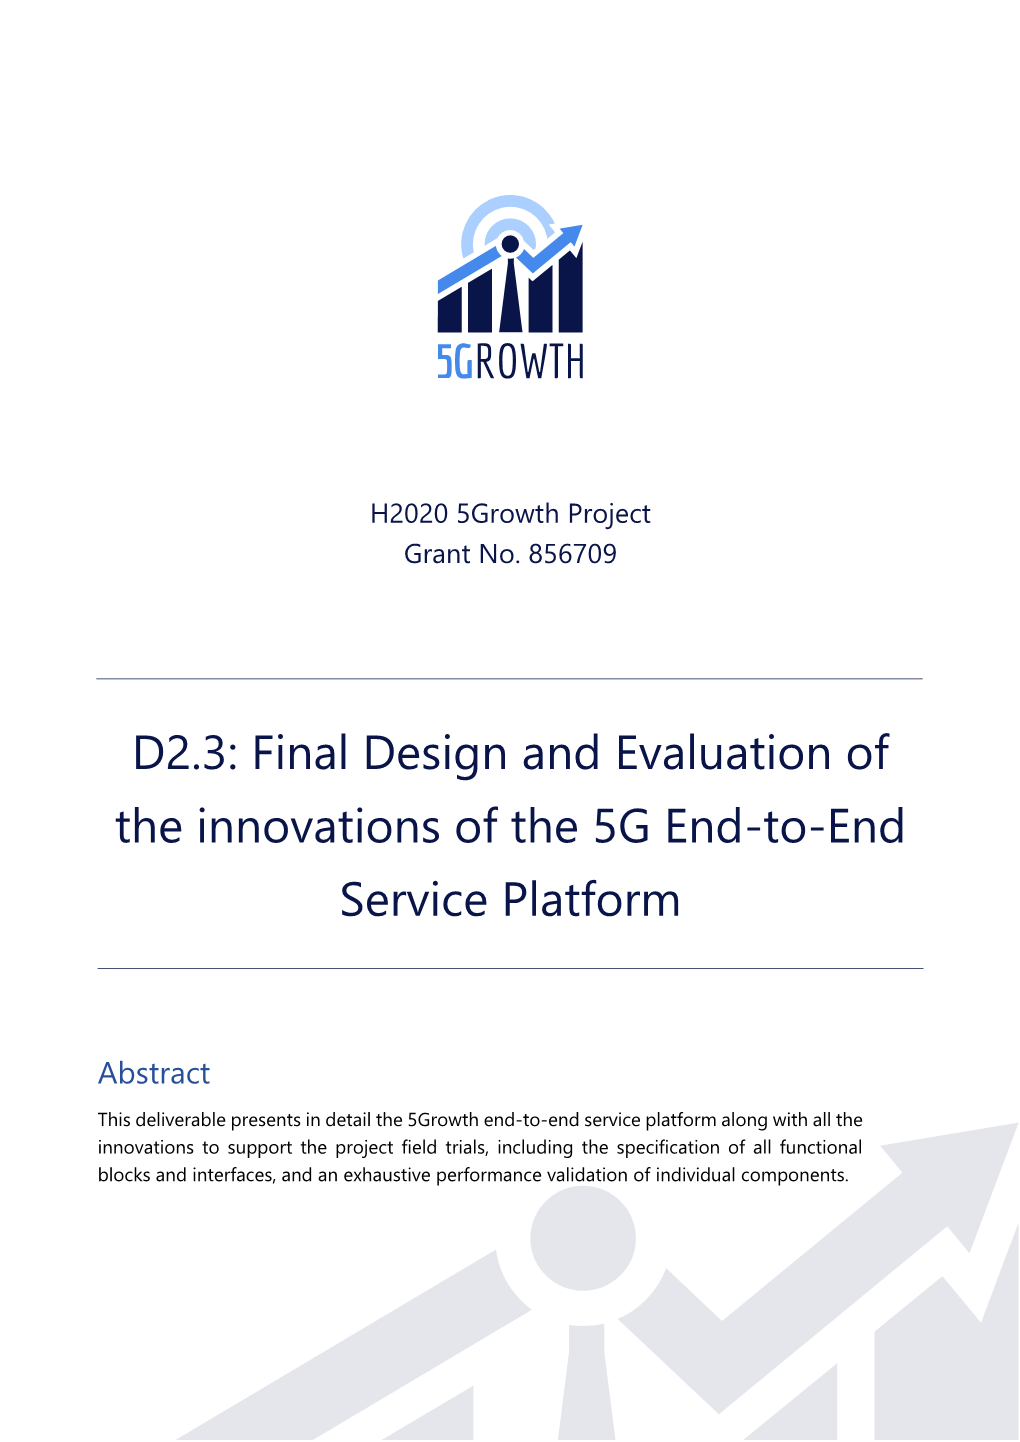 D2.3: Final Design and Evaluation of the Innovations of the 5G End-To-End Service Platform